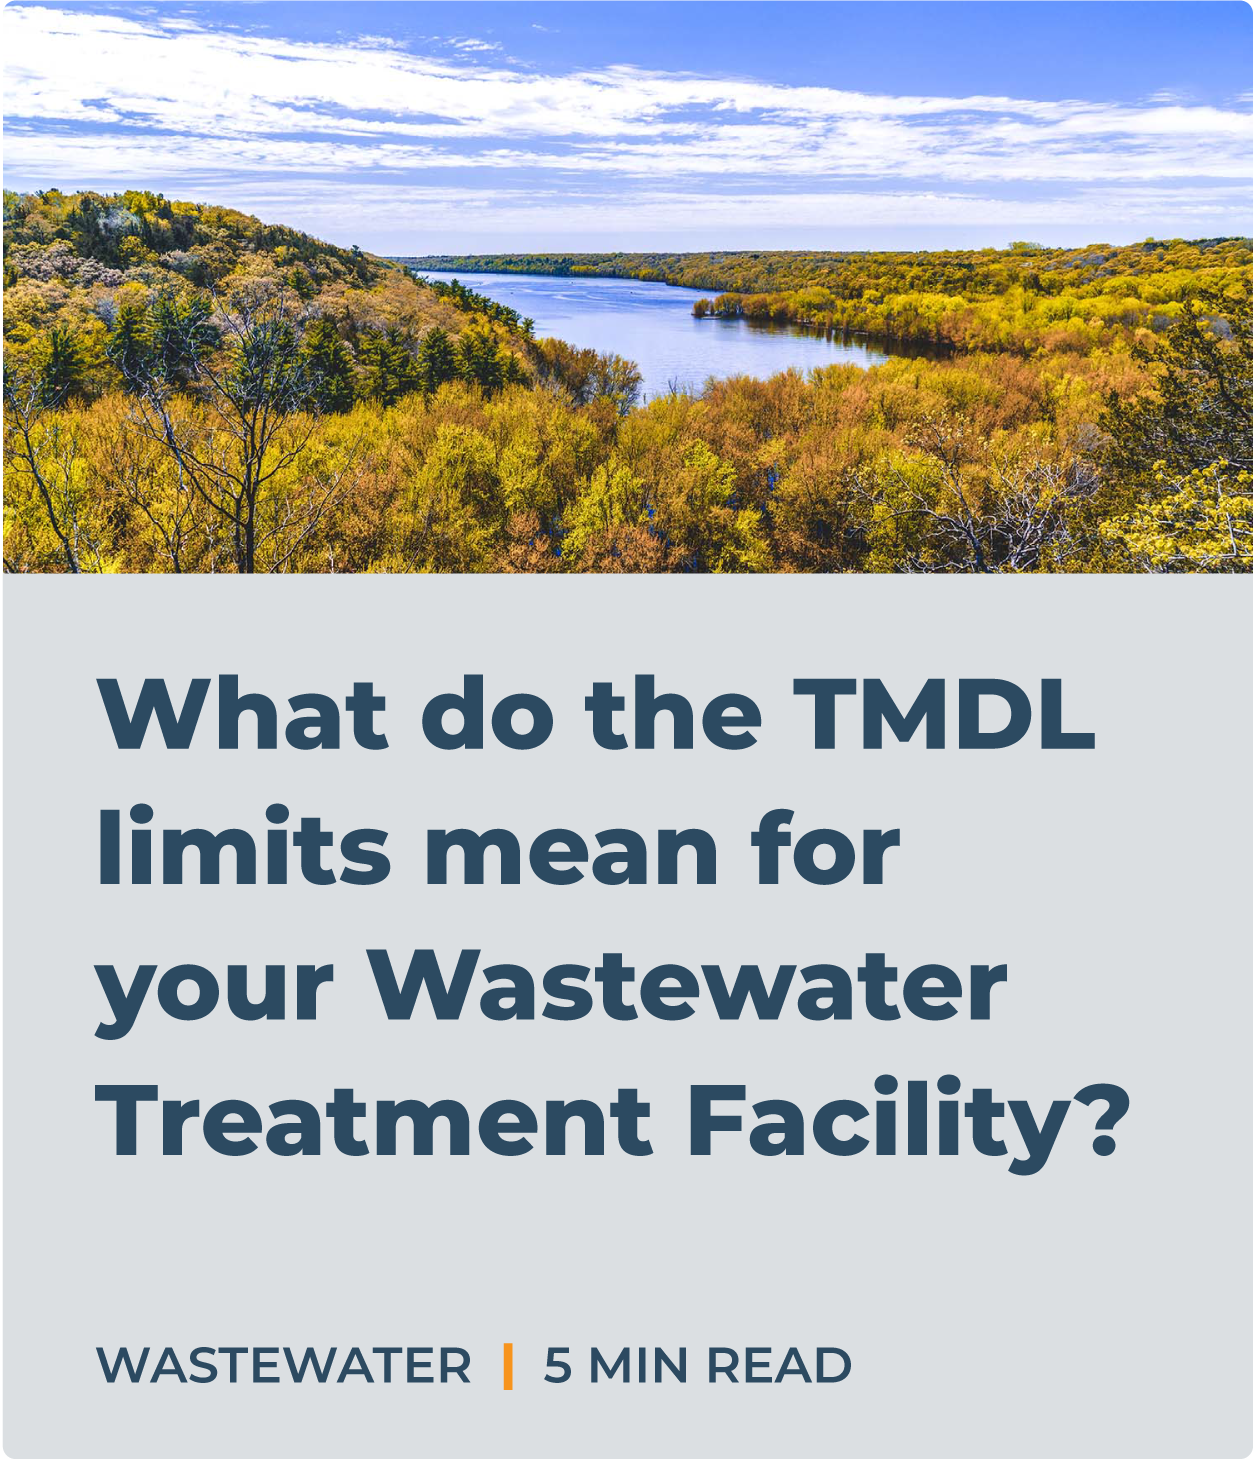 What do the TMDL limits mean for your Wastewater Treatment Facility?